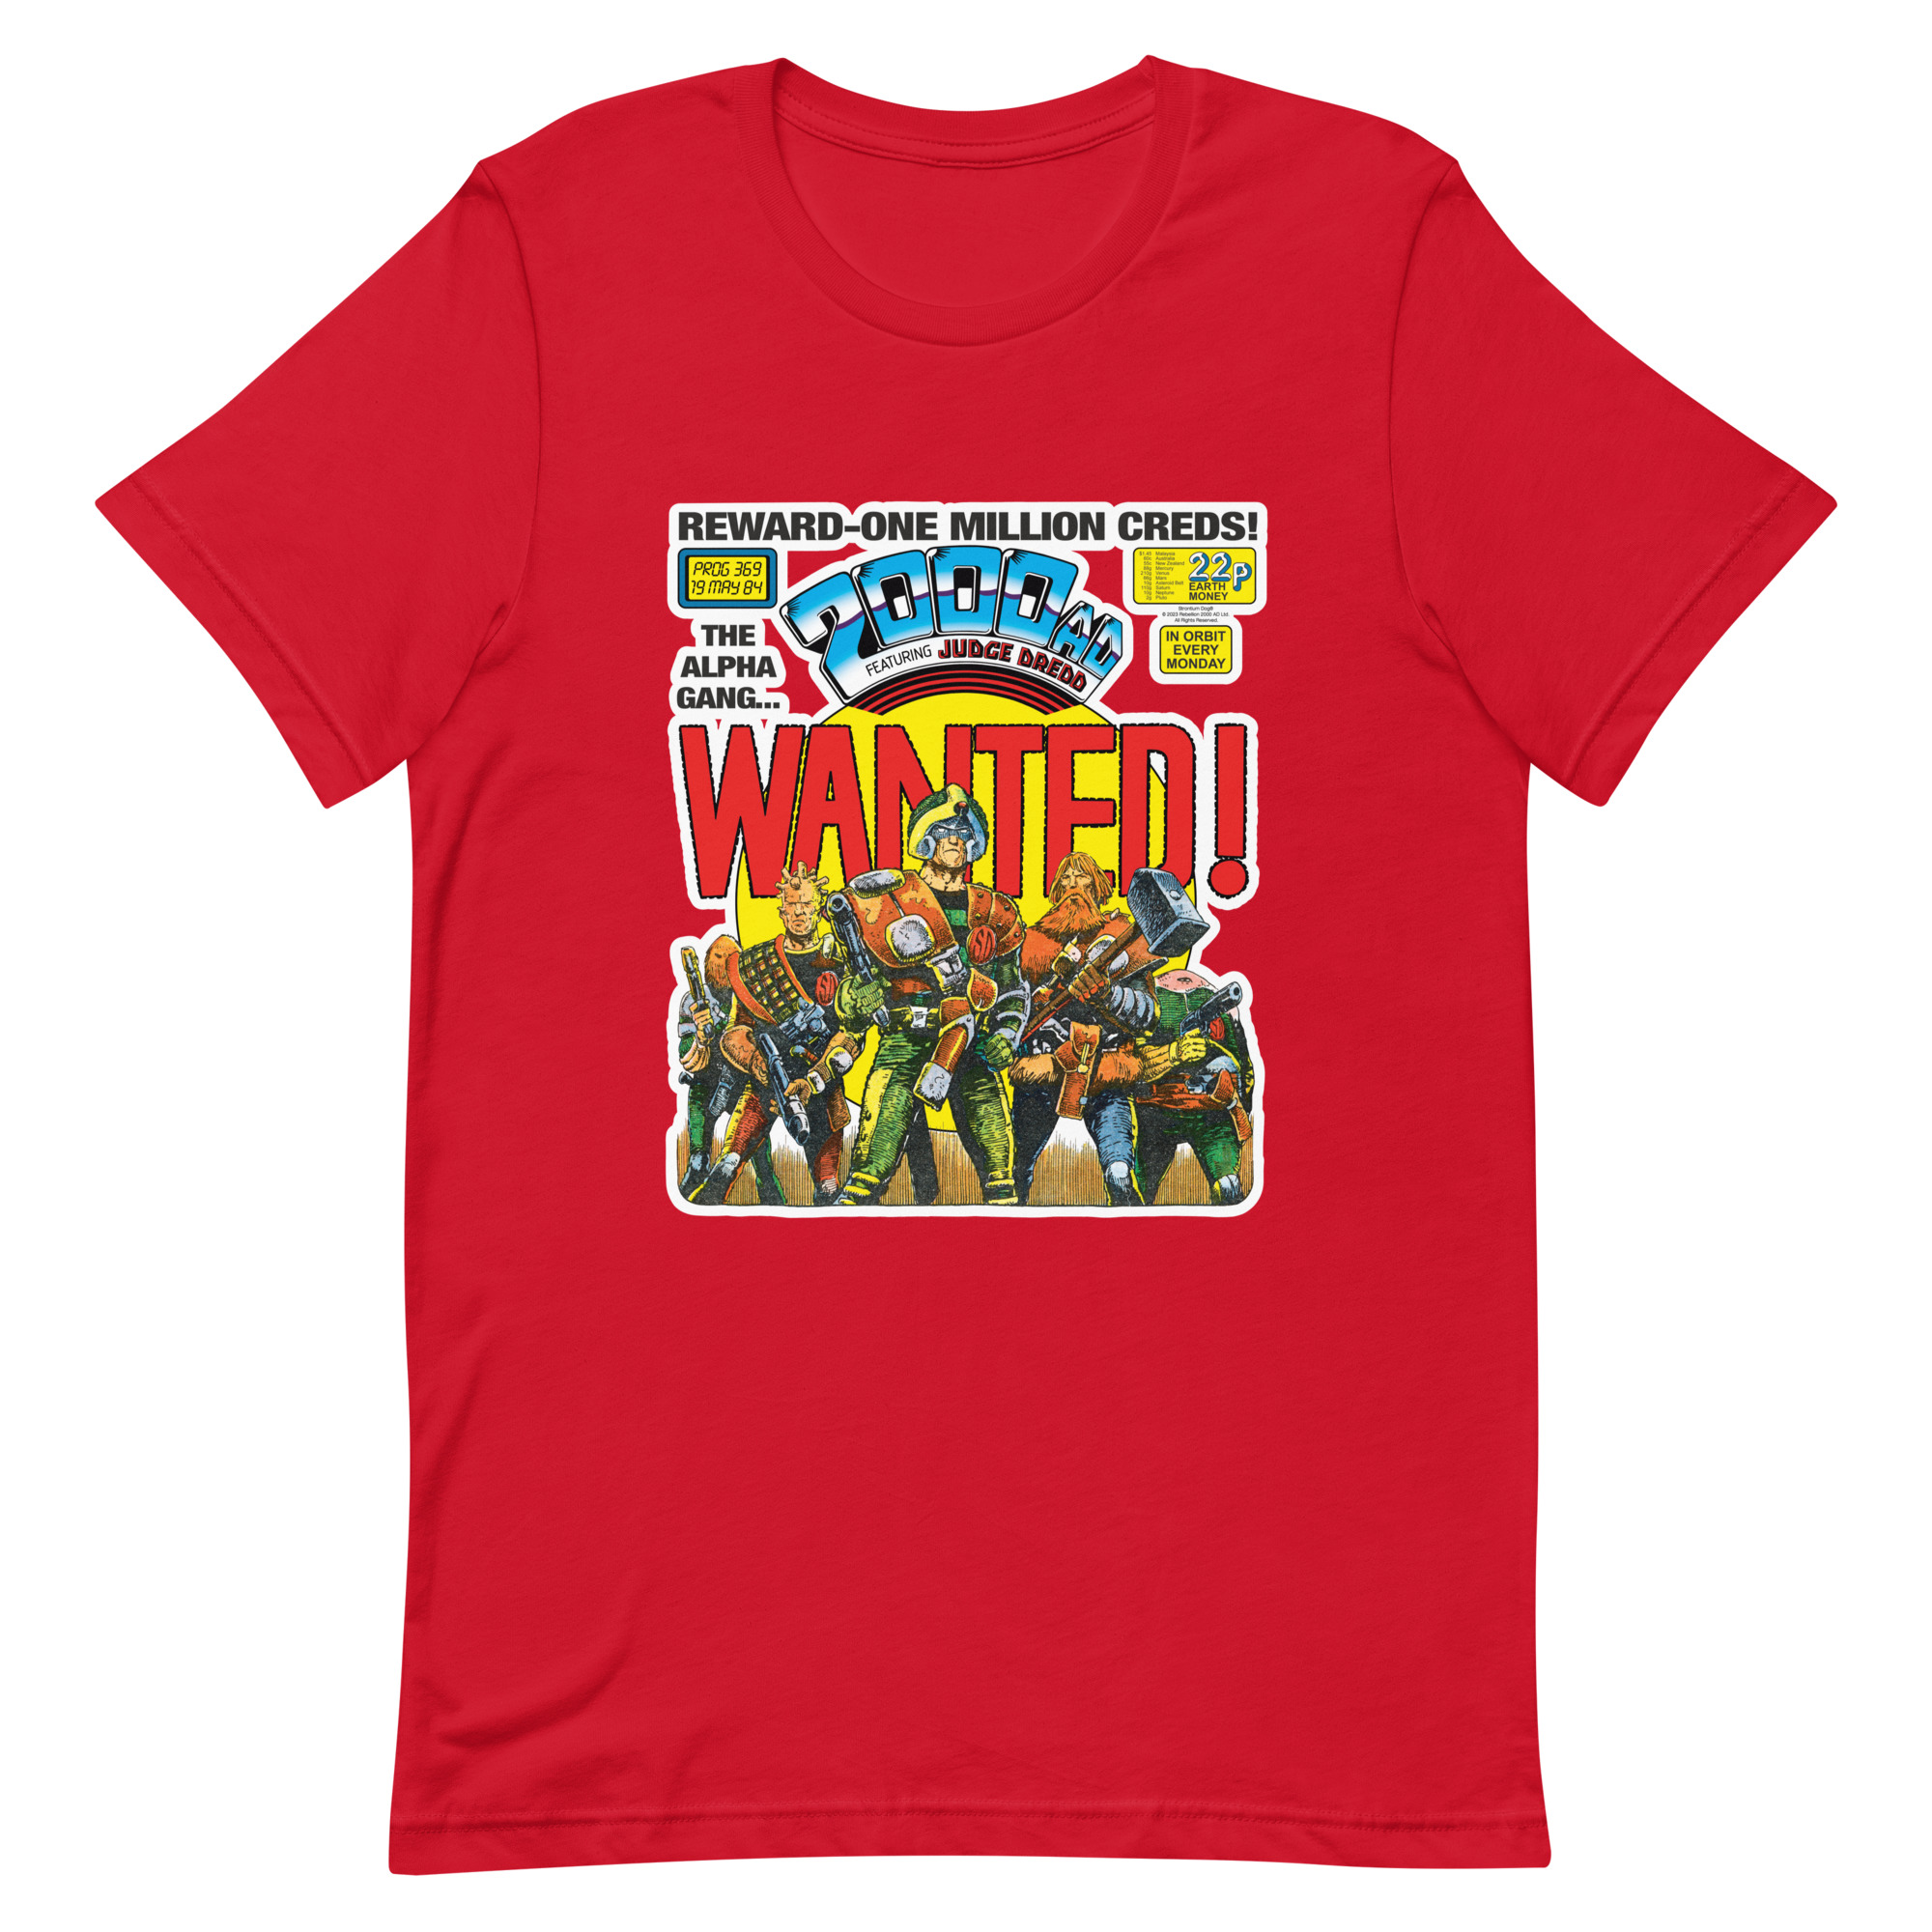 Red Tshirt with a 'Classic' 2000 AD Cover image on the chest. In the image Strontium Dog and his team, the Alpha gang, stand ready.